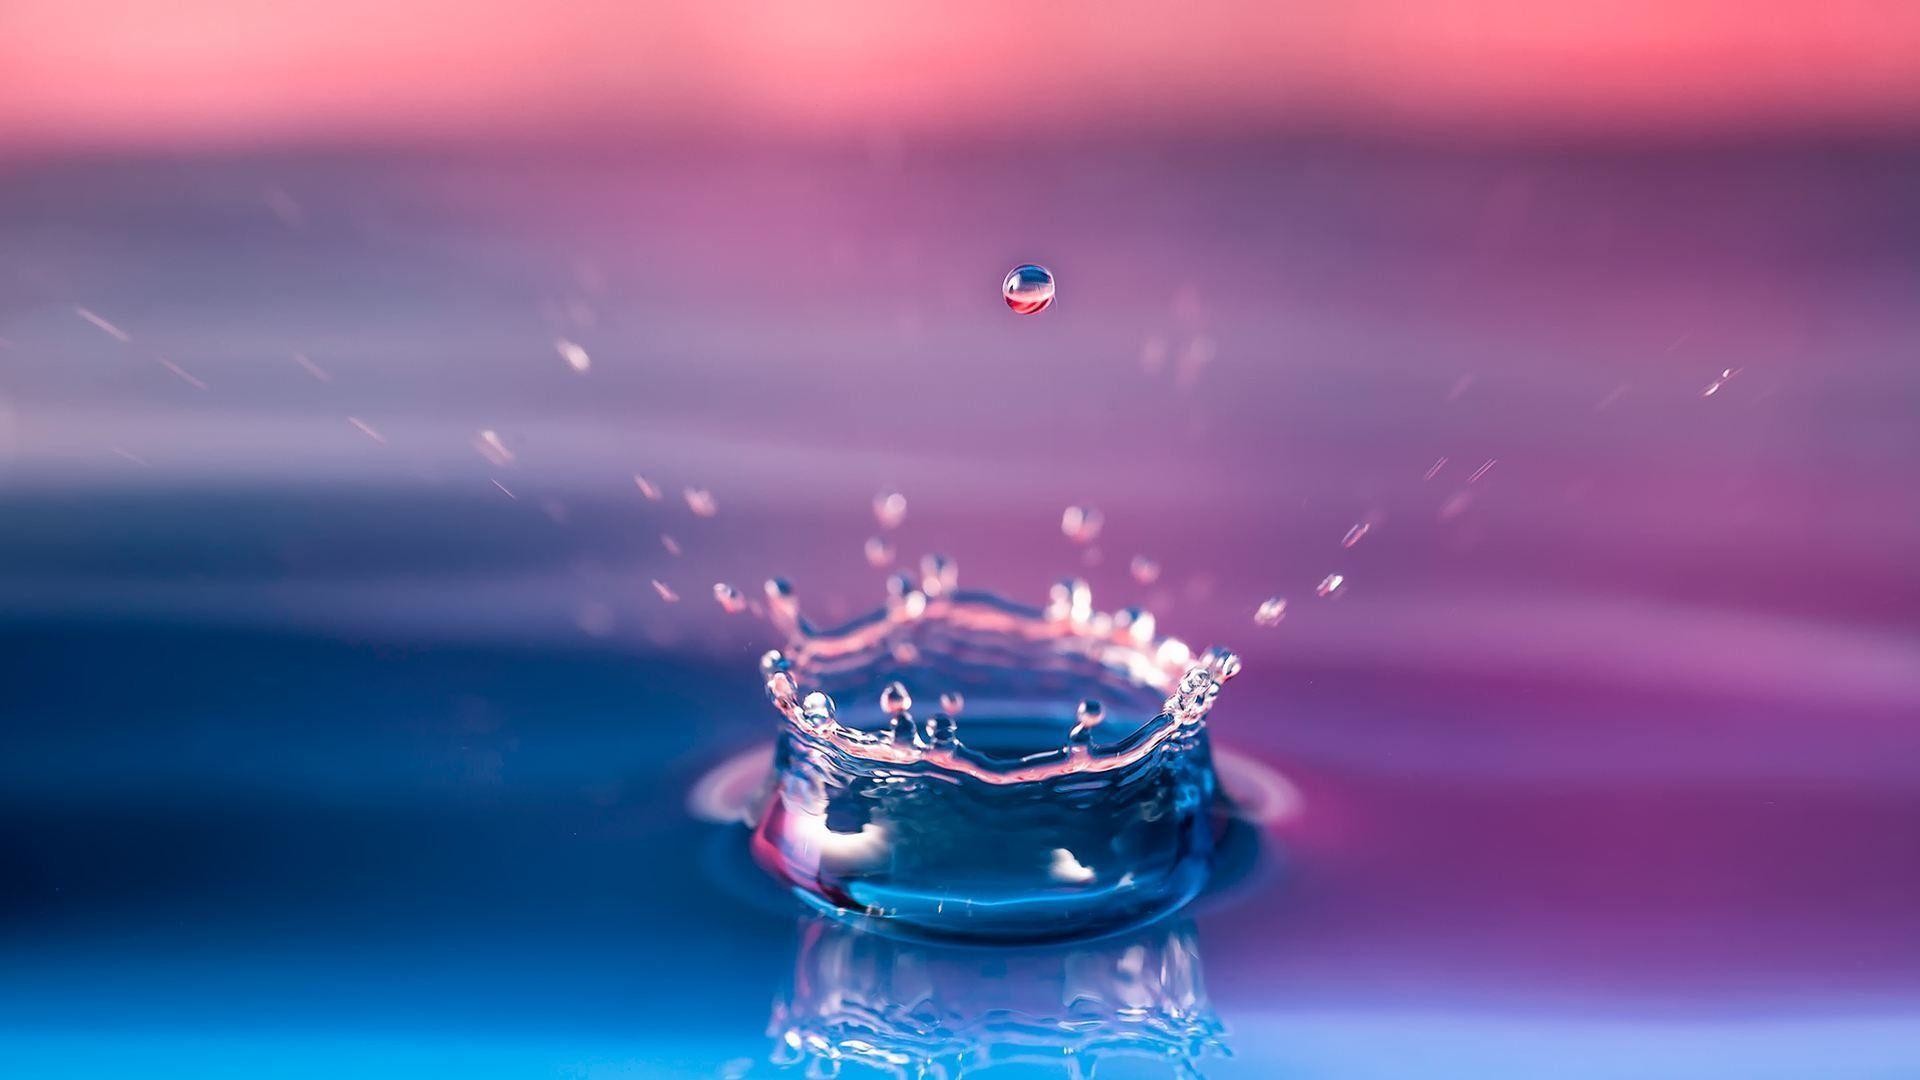 1920x1080 Abstract Water Drops HD Wallpapers Download | HD Free Wallpapers .